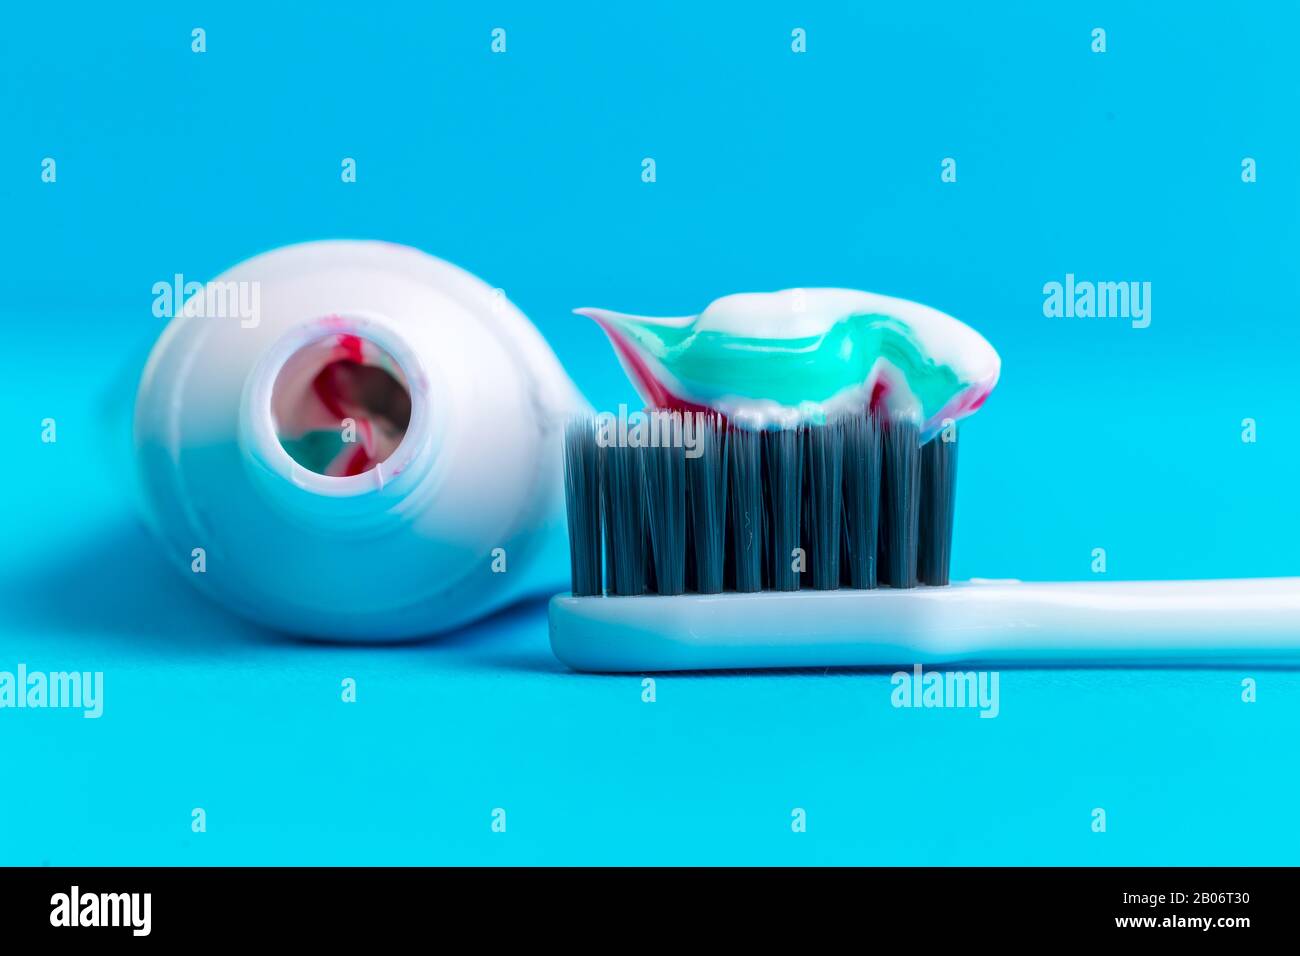 Toothbrush and toothpaste close up. Creative Photo Stock Photo - Alamy